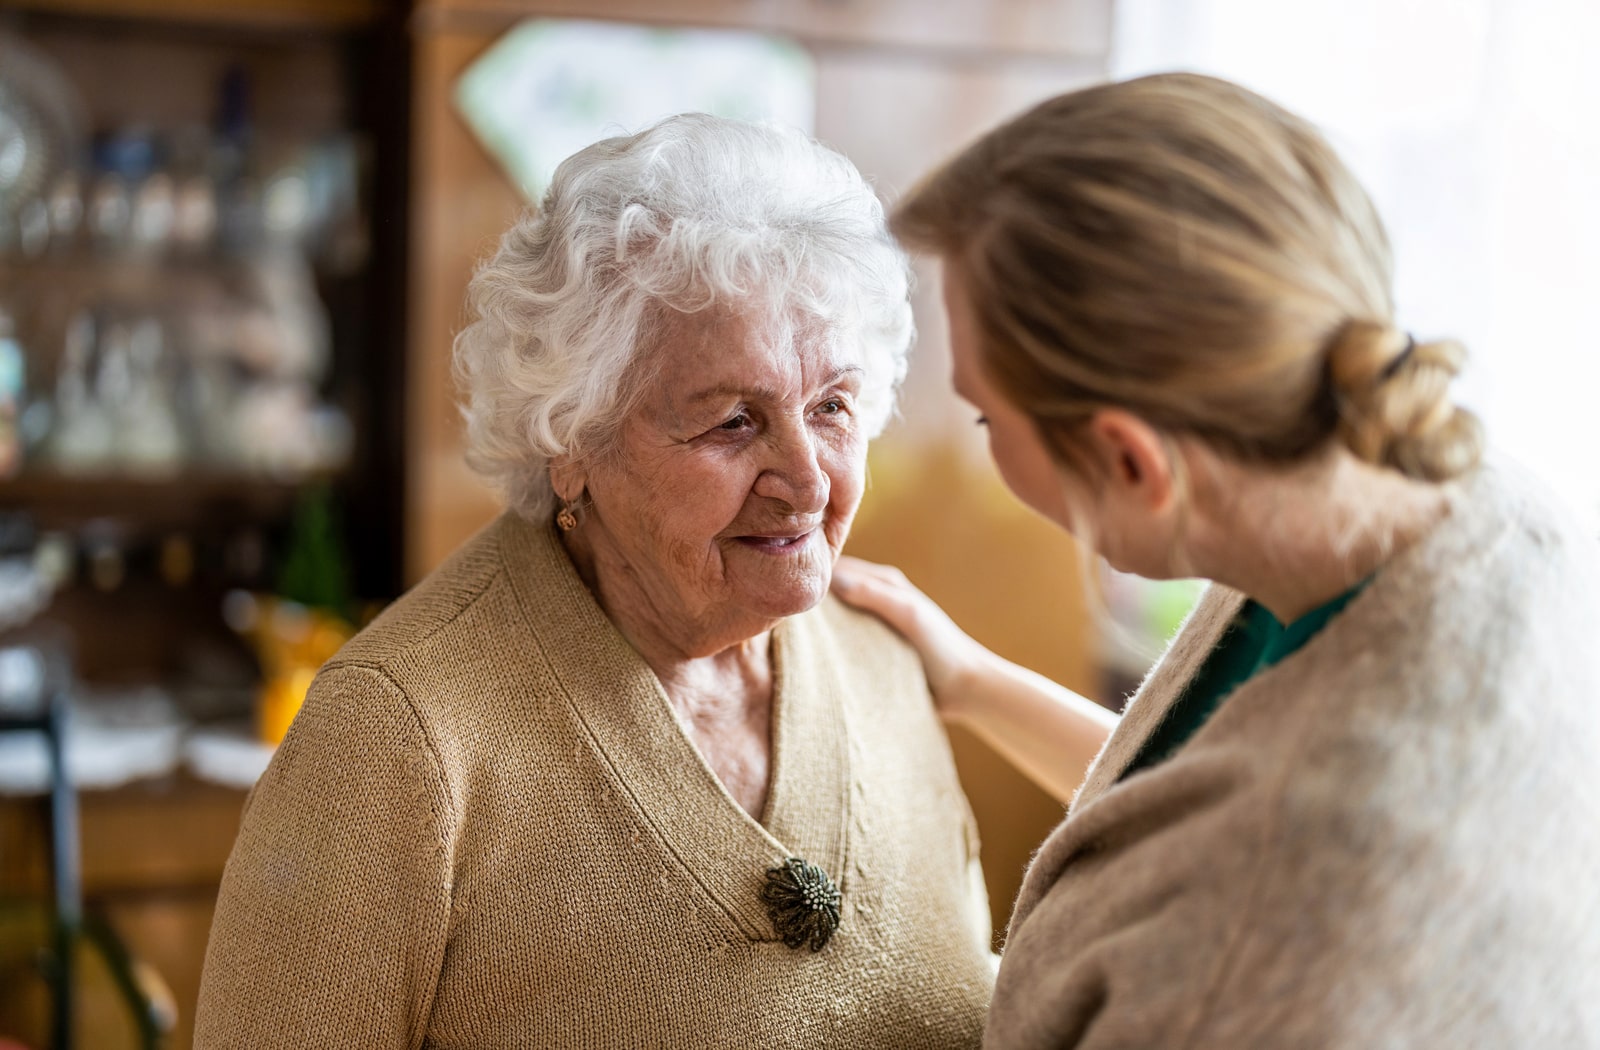 A female nurse interacting with a dementia patient